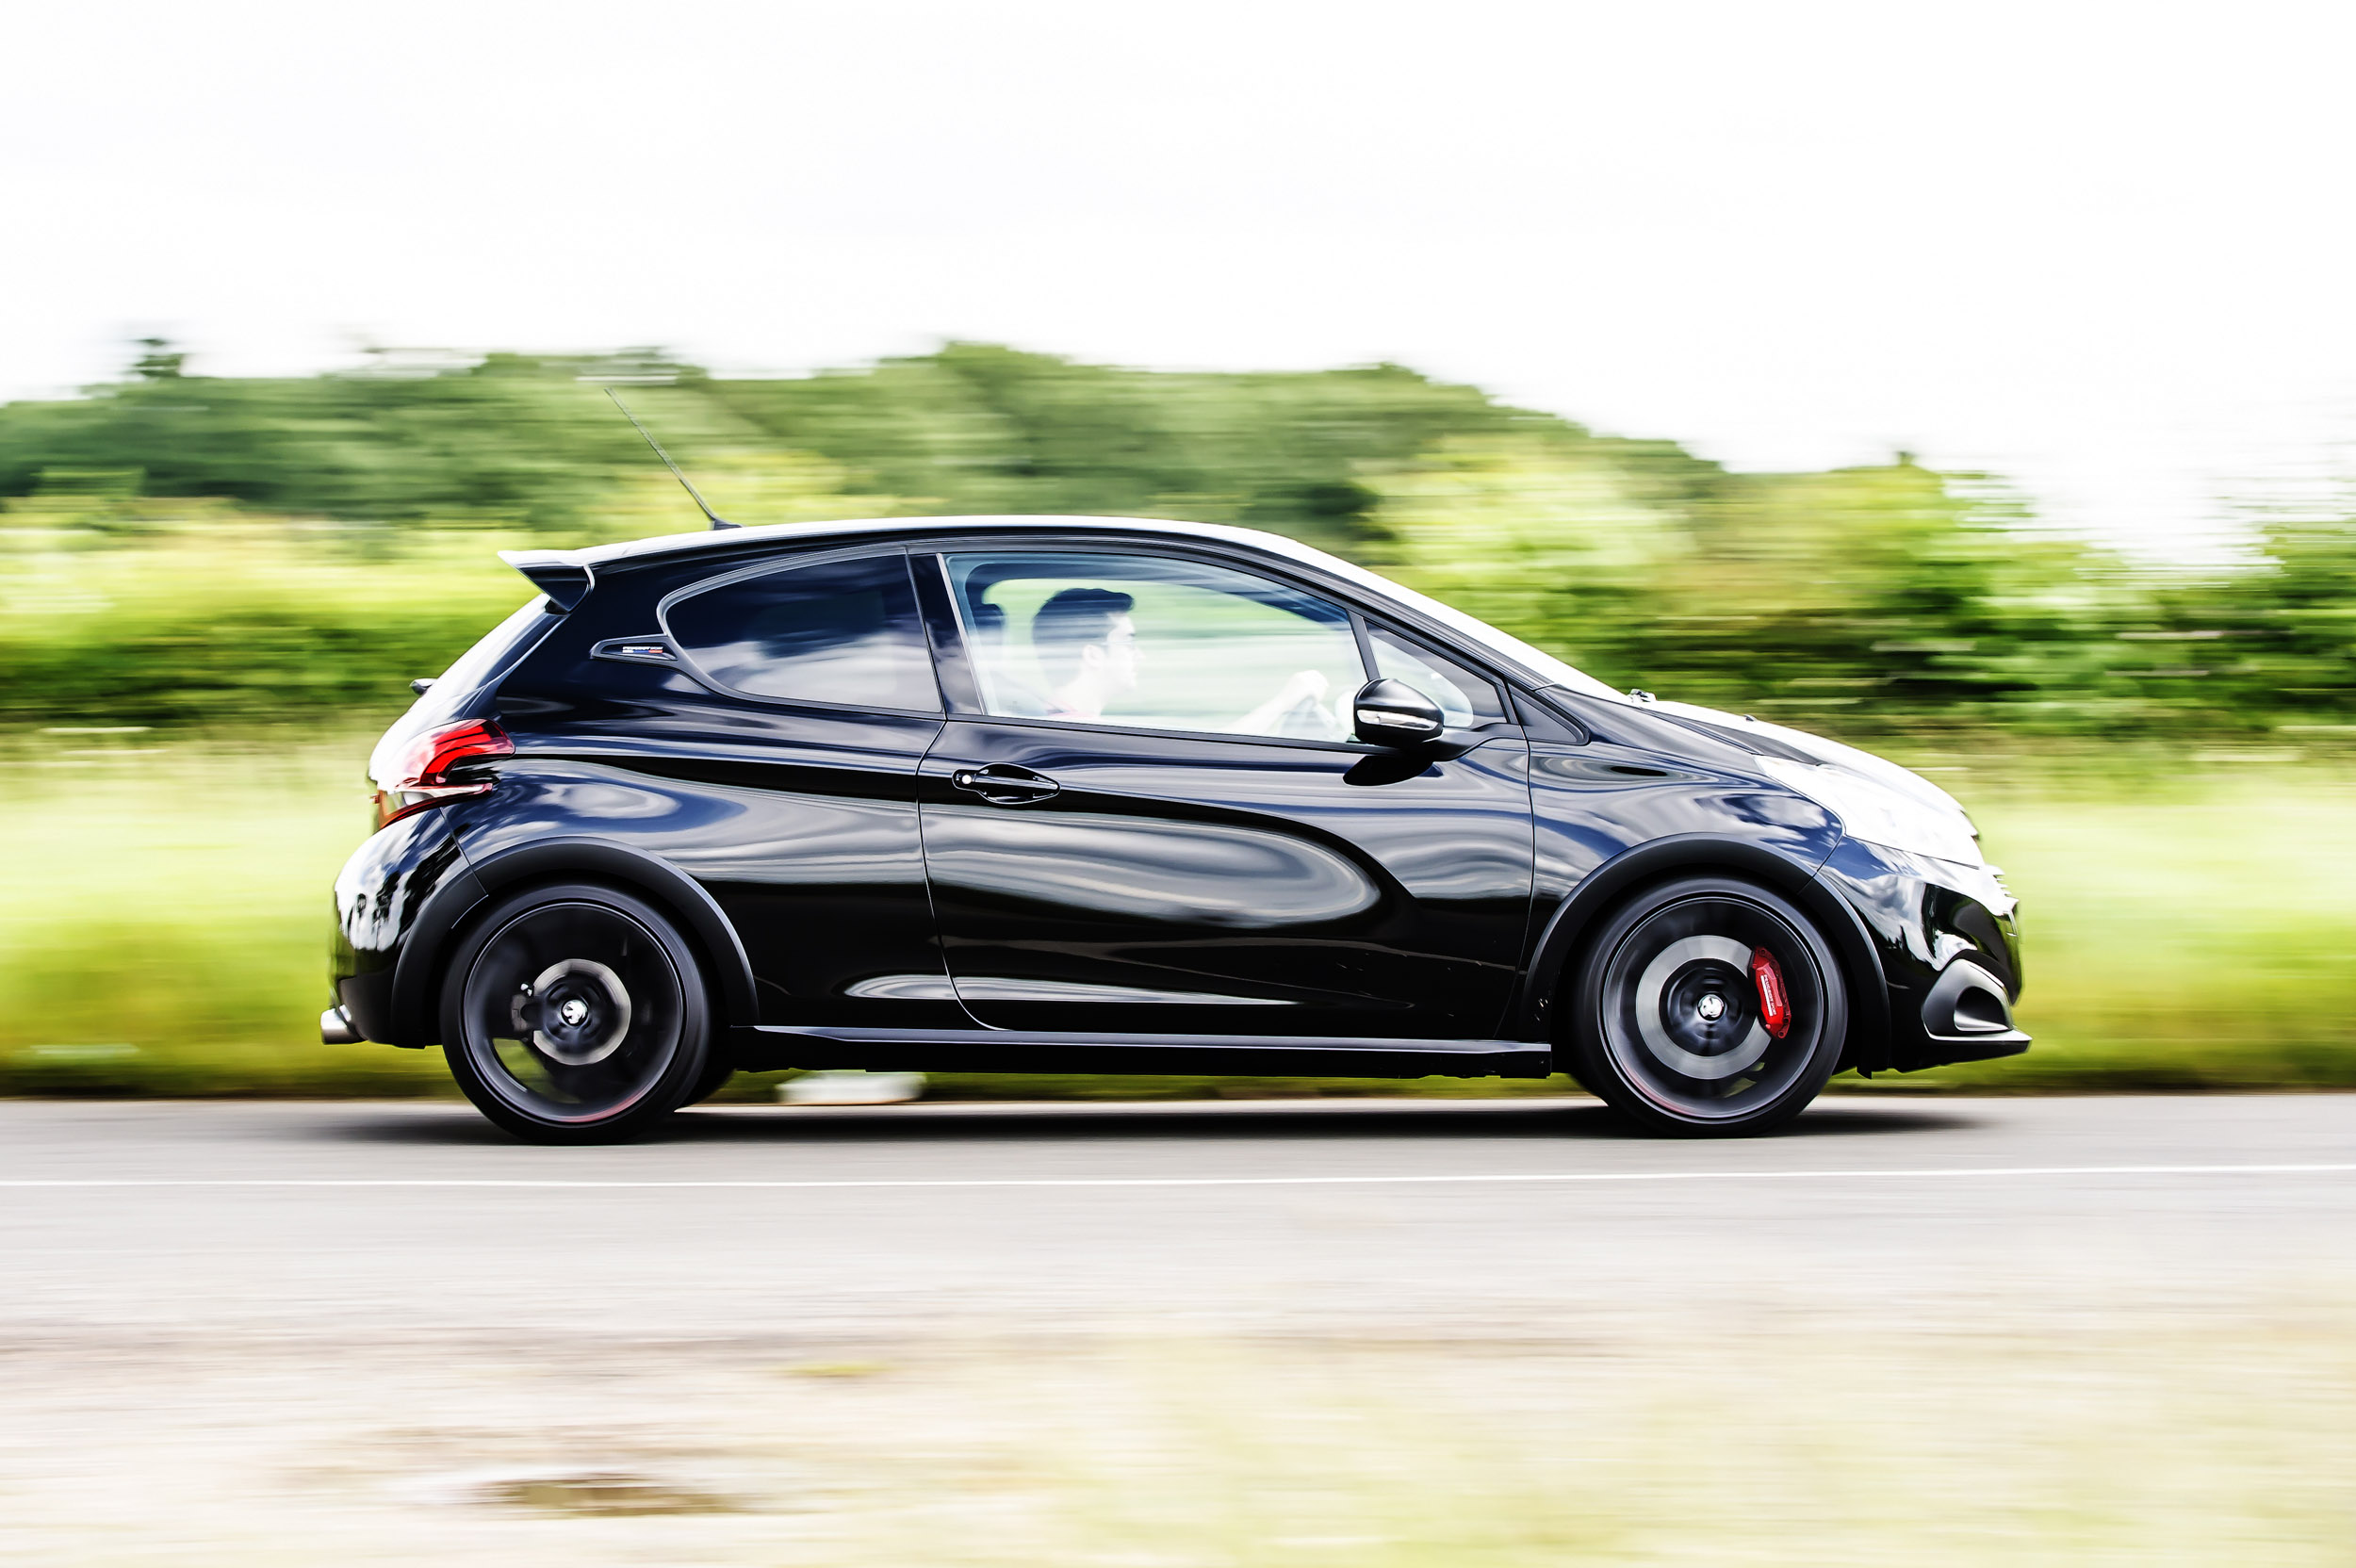 Peugeot 8 Gti And Gti By Peugeot Sport Review A Return To 5 Gti Form Peugeot 8 Gti Performance Evo